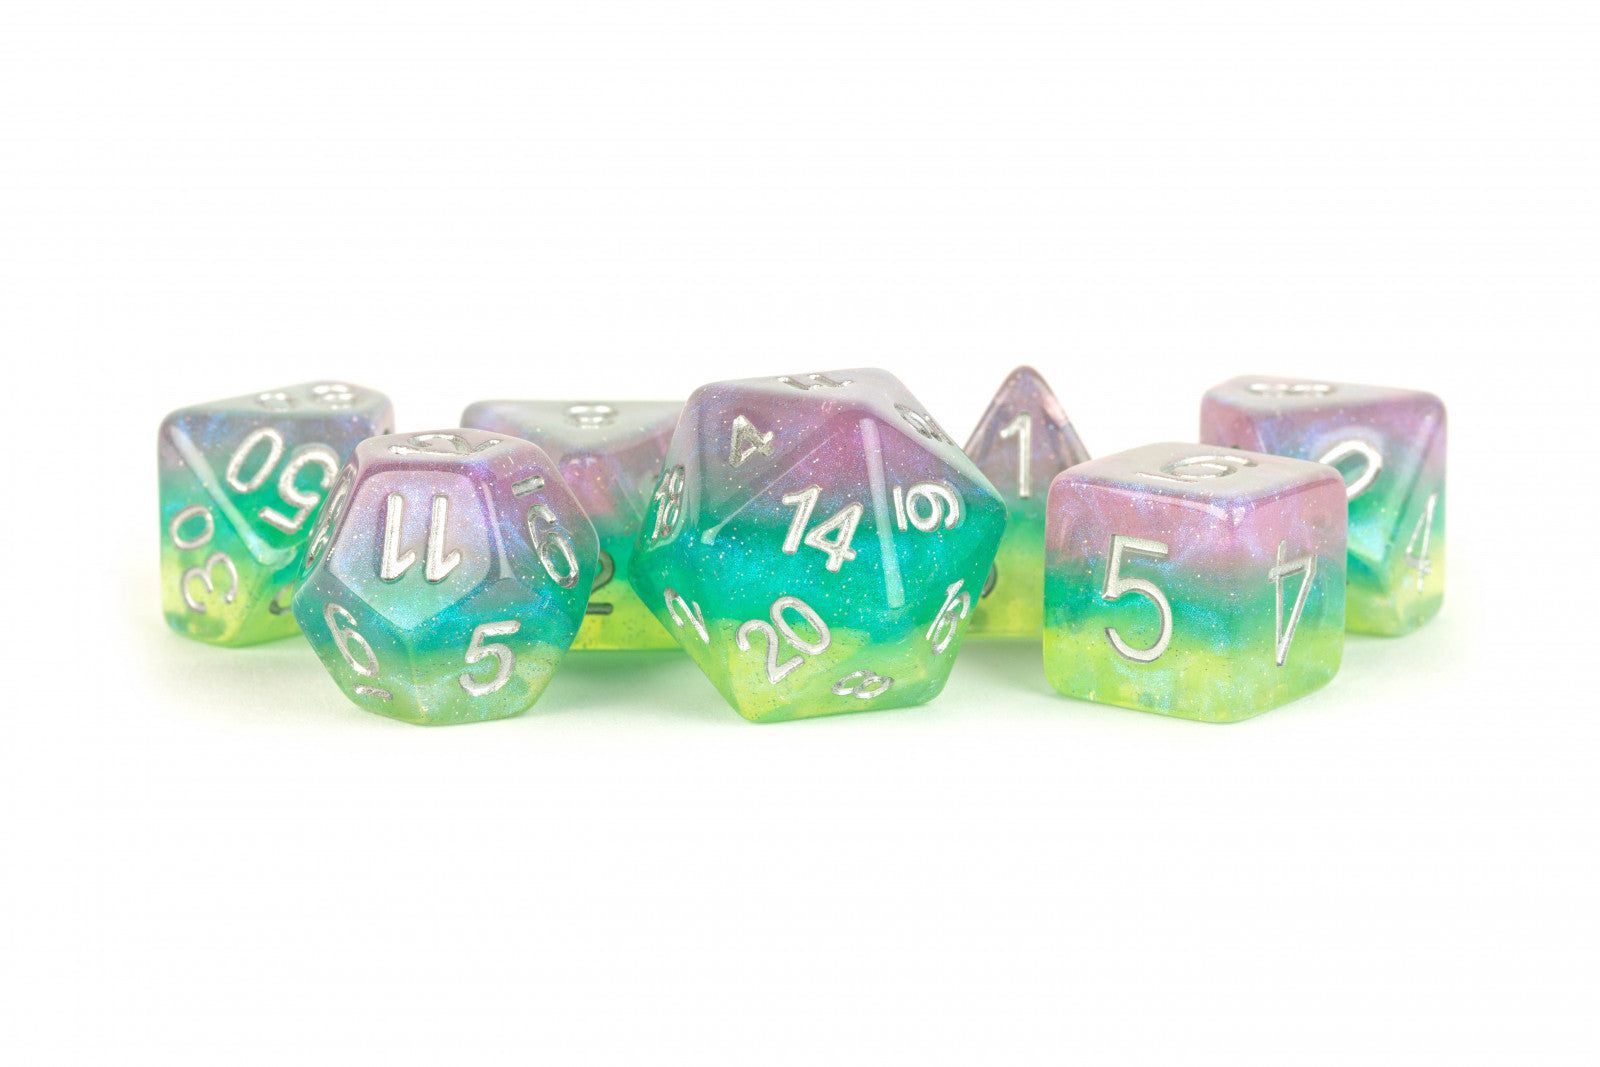 MDG Resin 16mm Polyhedral Dice Set - Layered Stardust Radiance